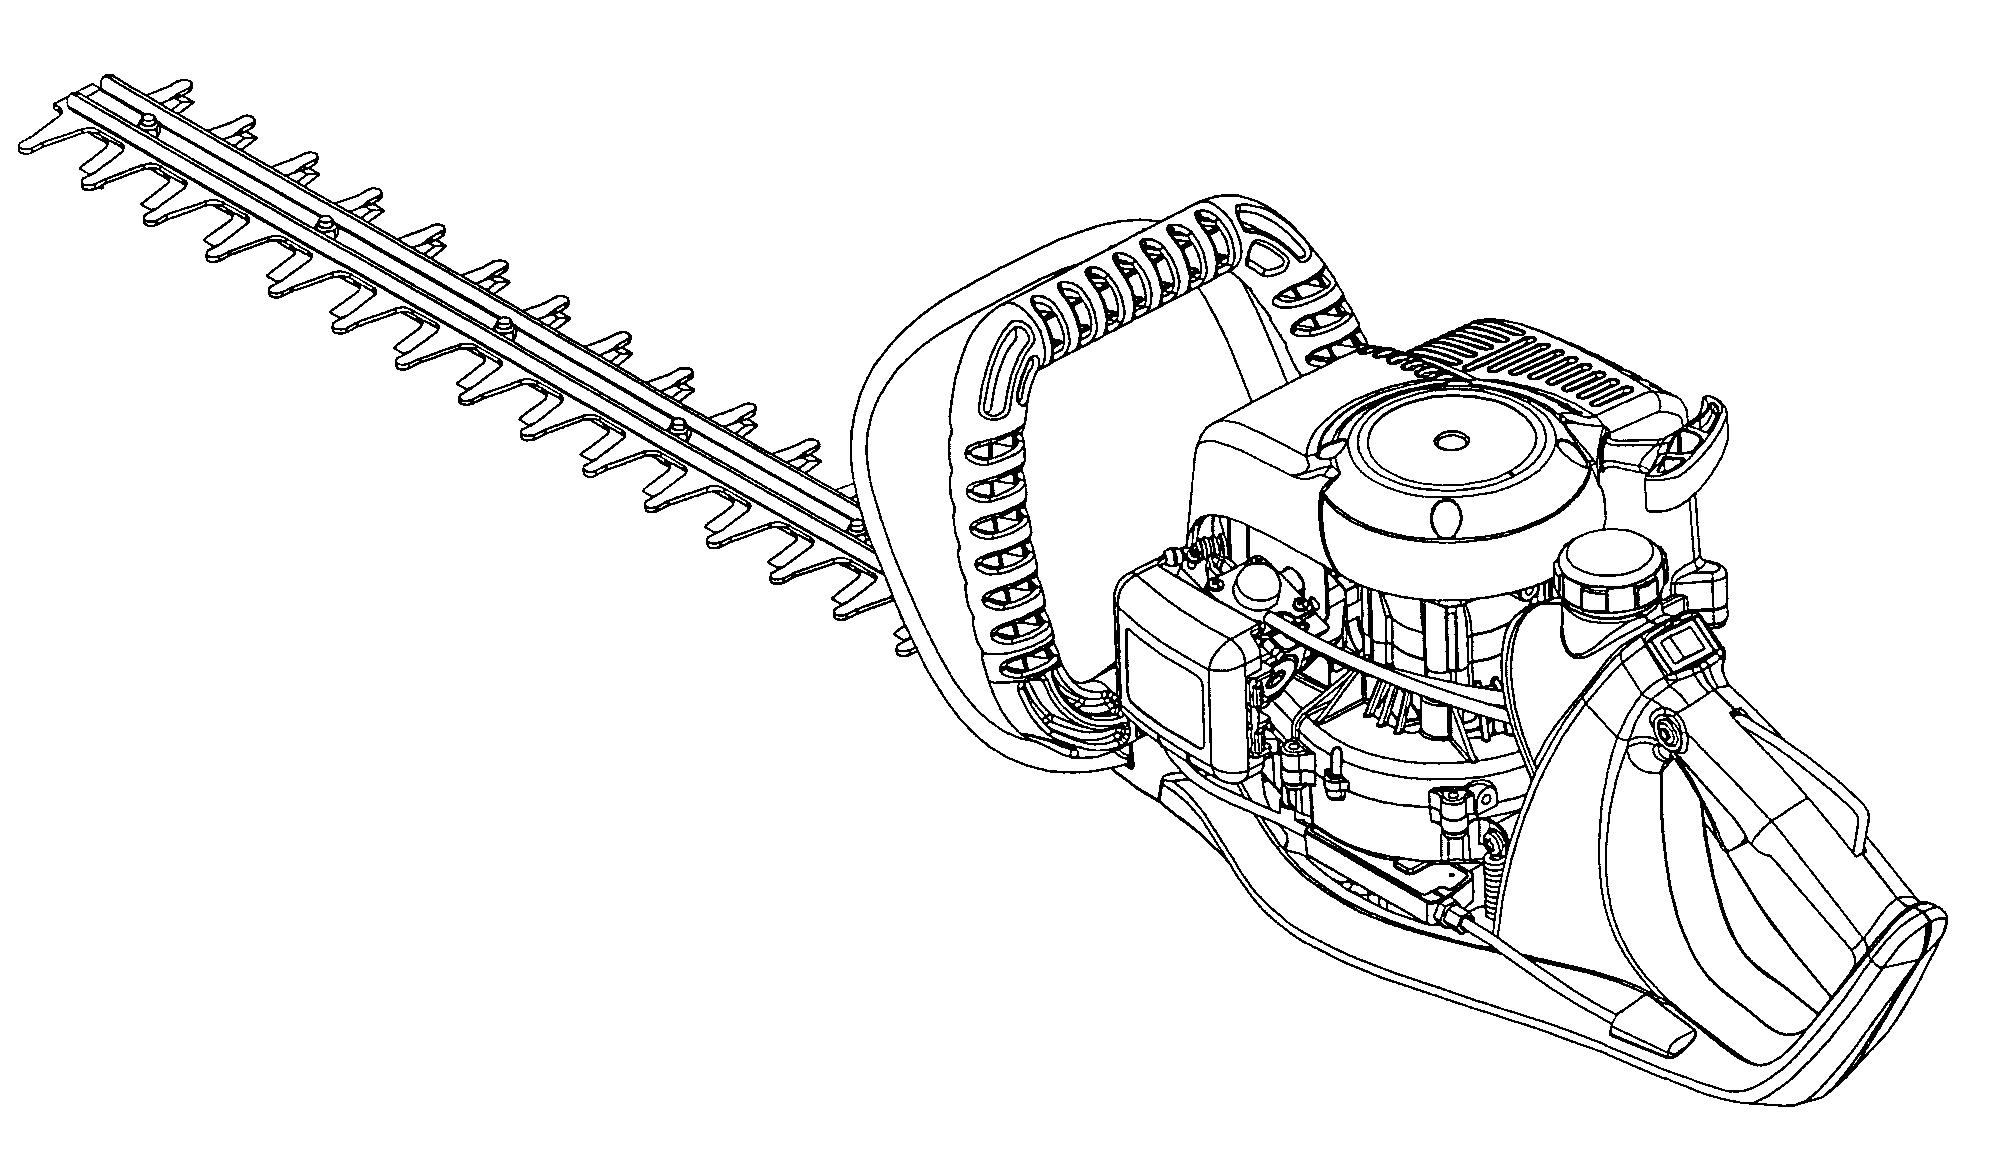 Brake device for power tool